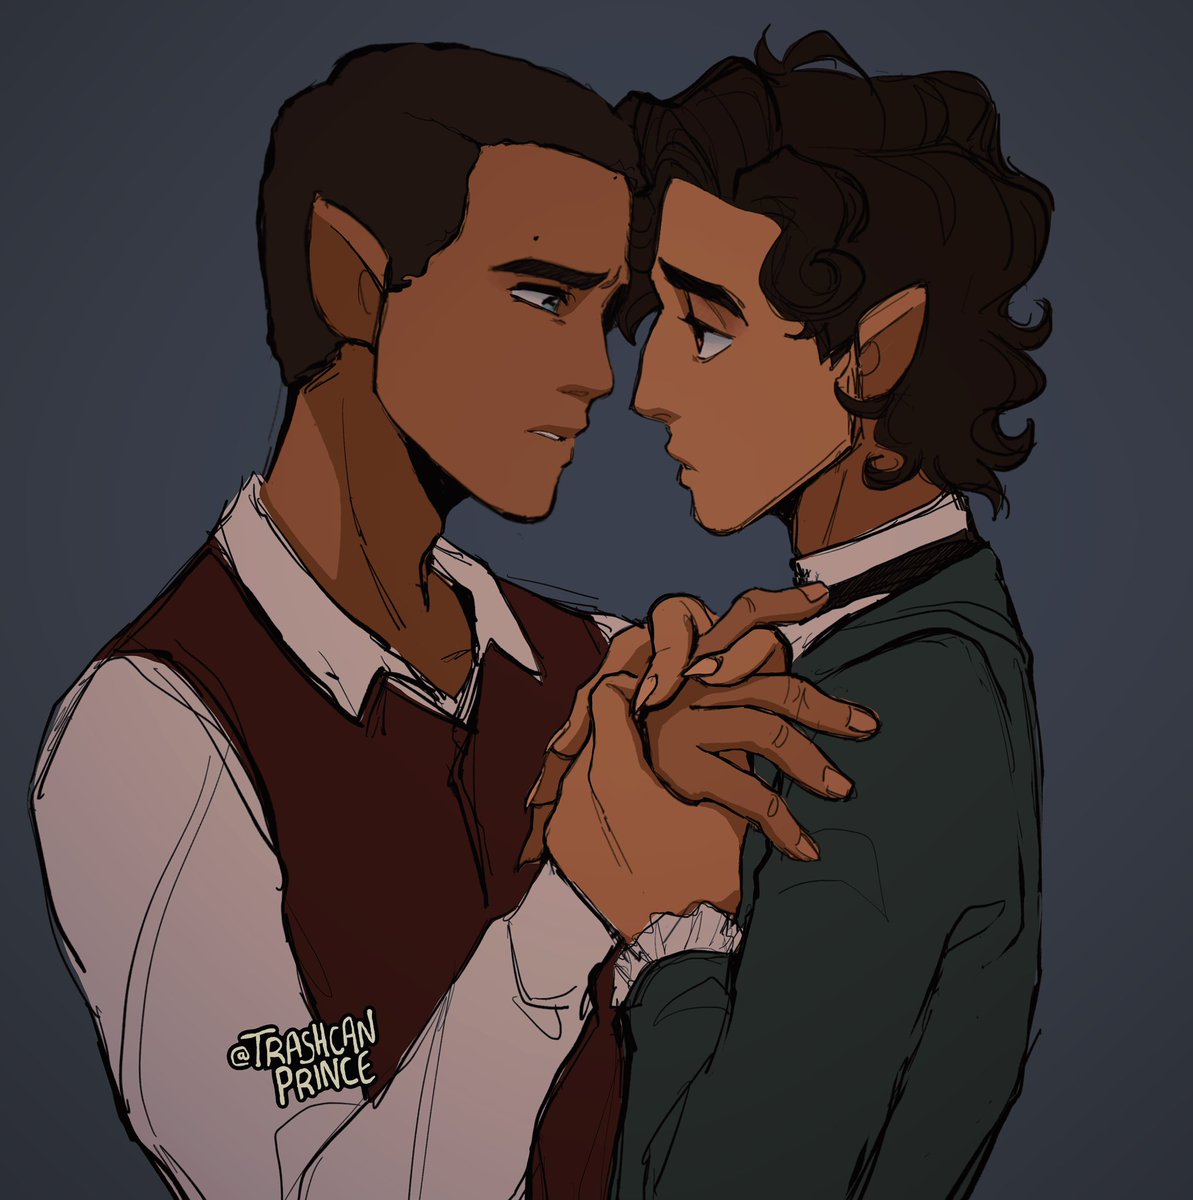 “I want you more than anything in the world”

#iwtvspoilers #loumand #iwtv #InterviewWithTheVampire #armand #louisdepointedulac